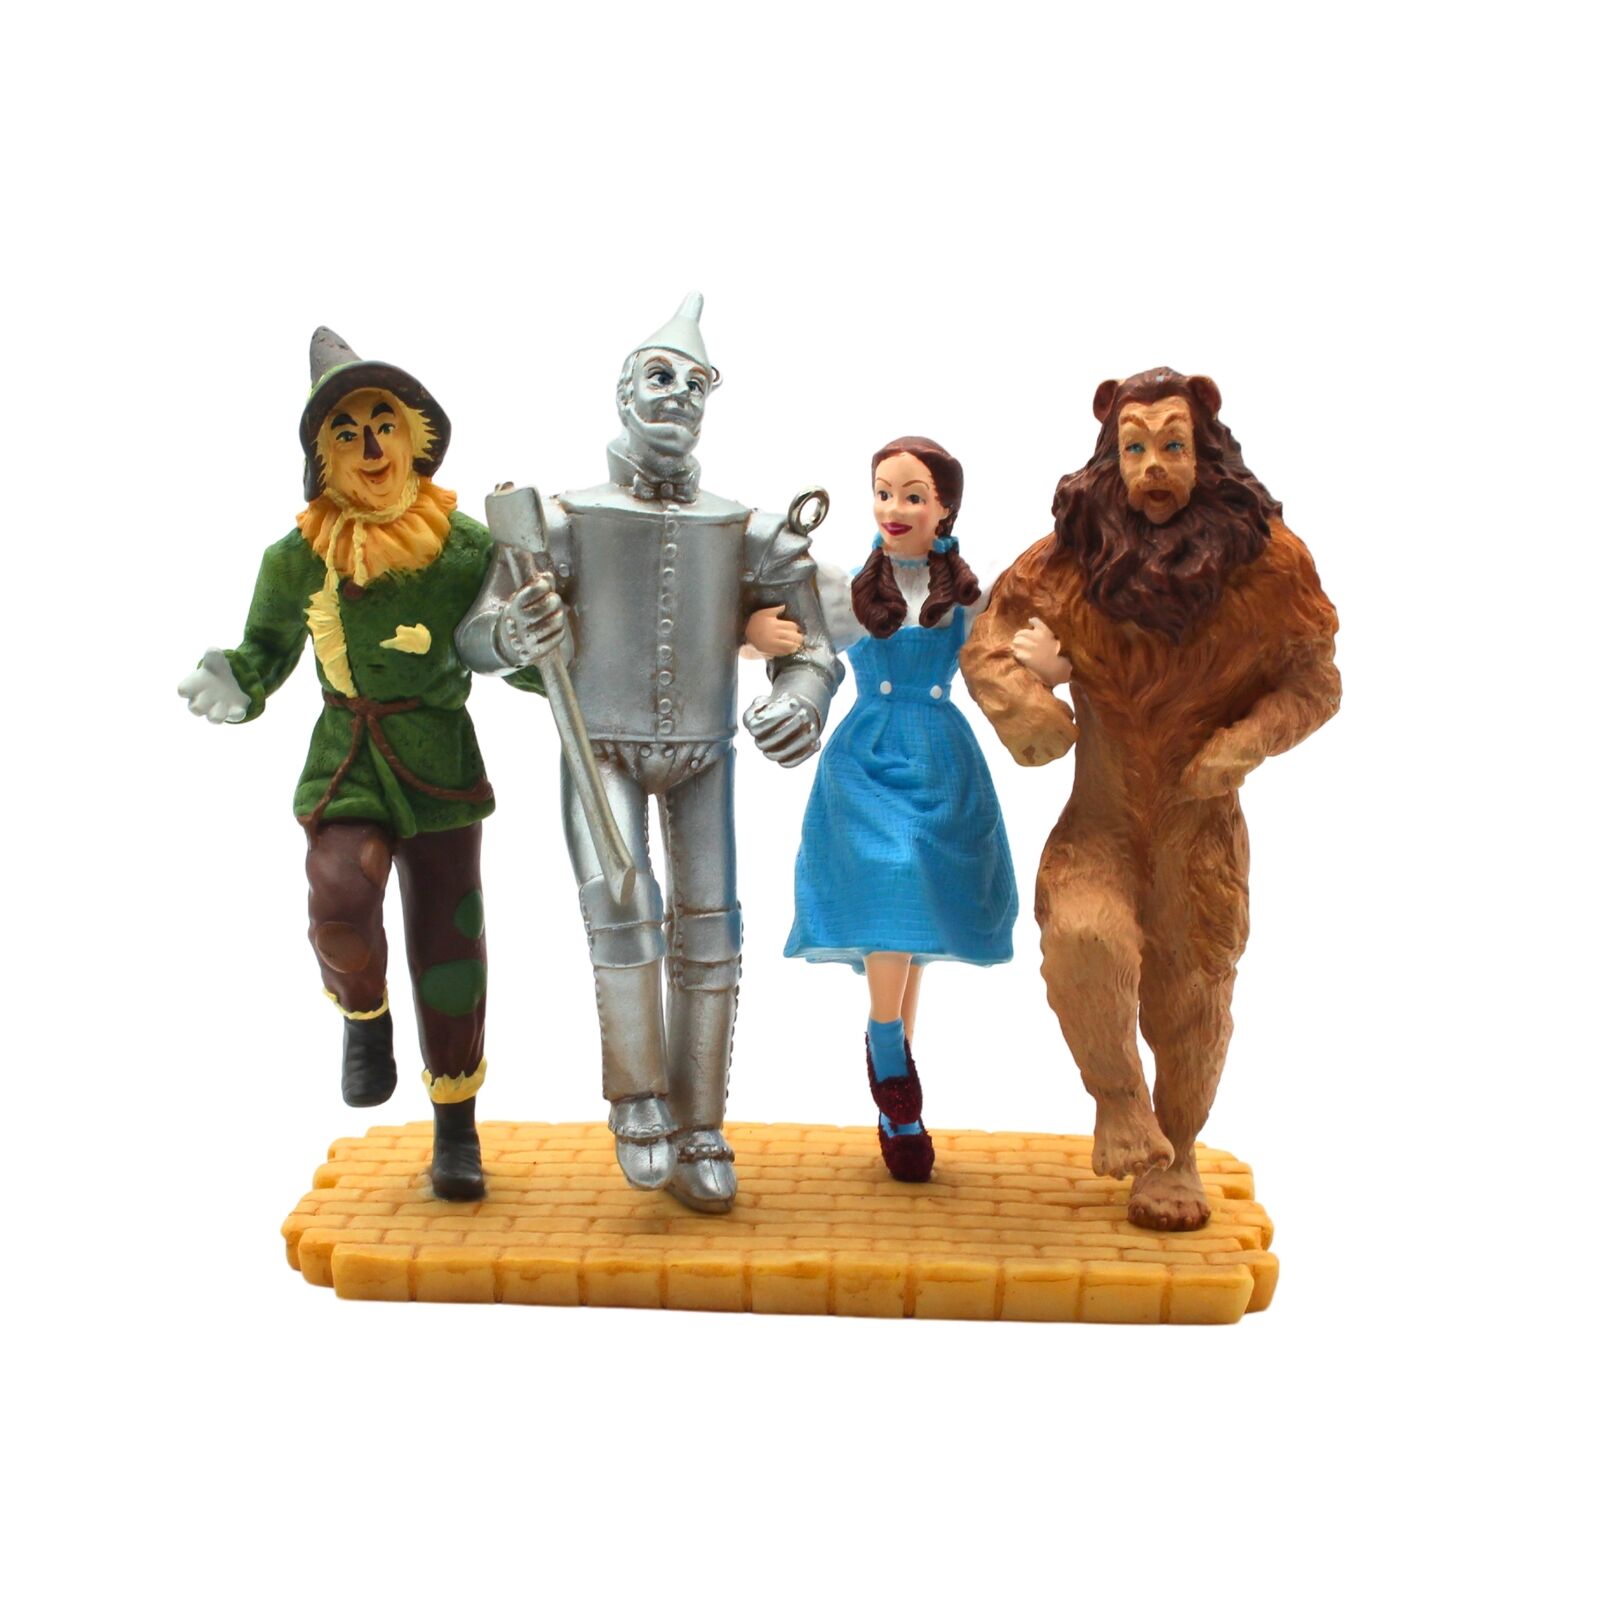 Hallmark Ornament: 2005 Off to See the Wizard | QXI8925 | The Wizard of Oz